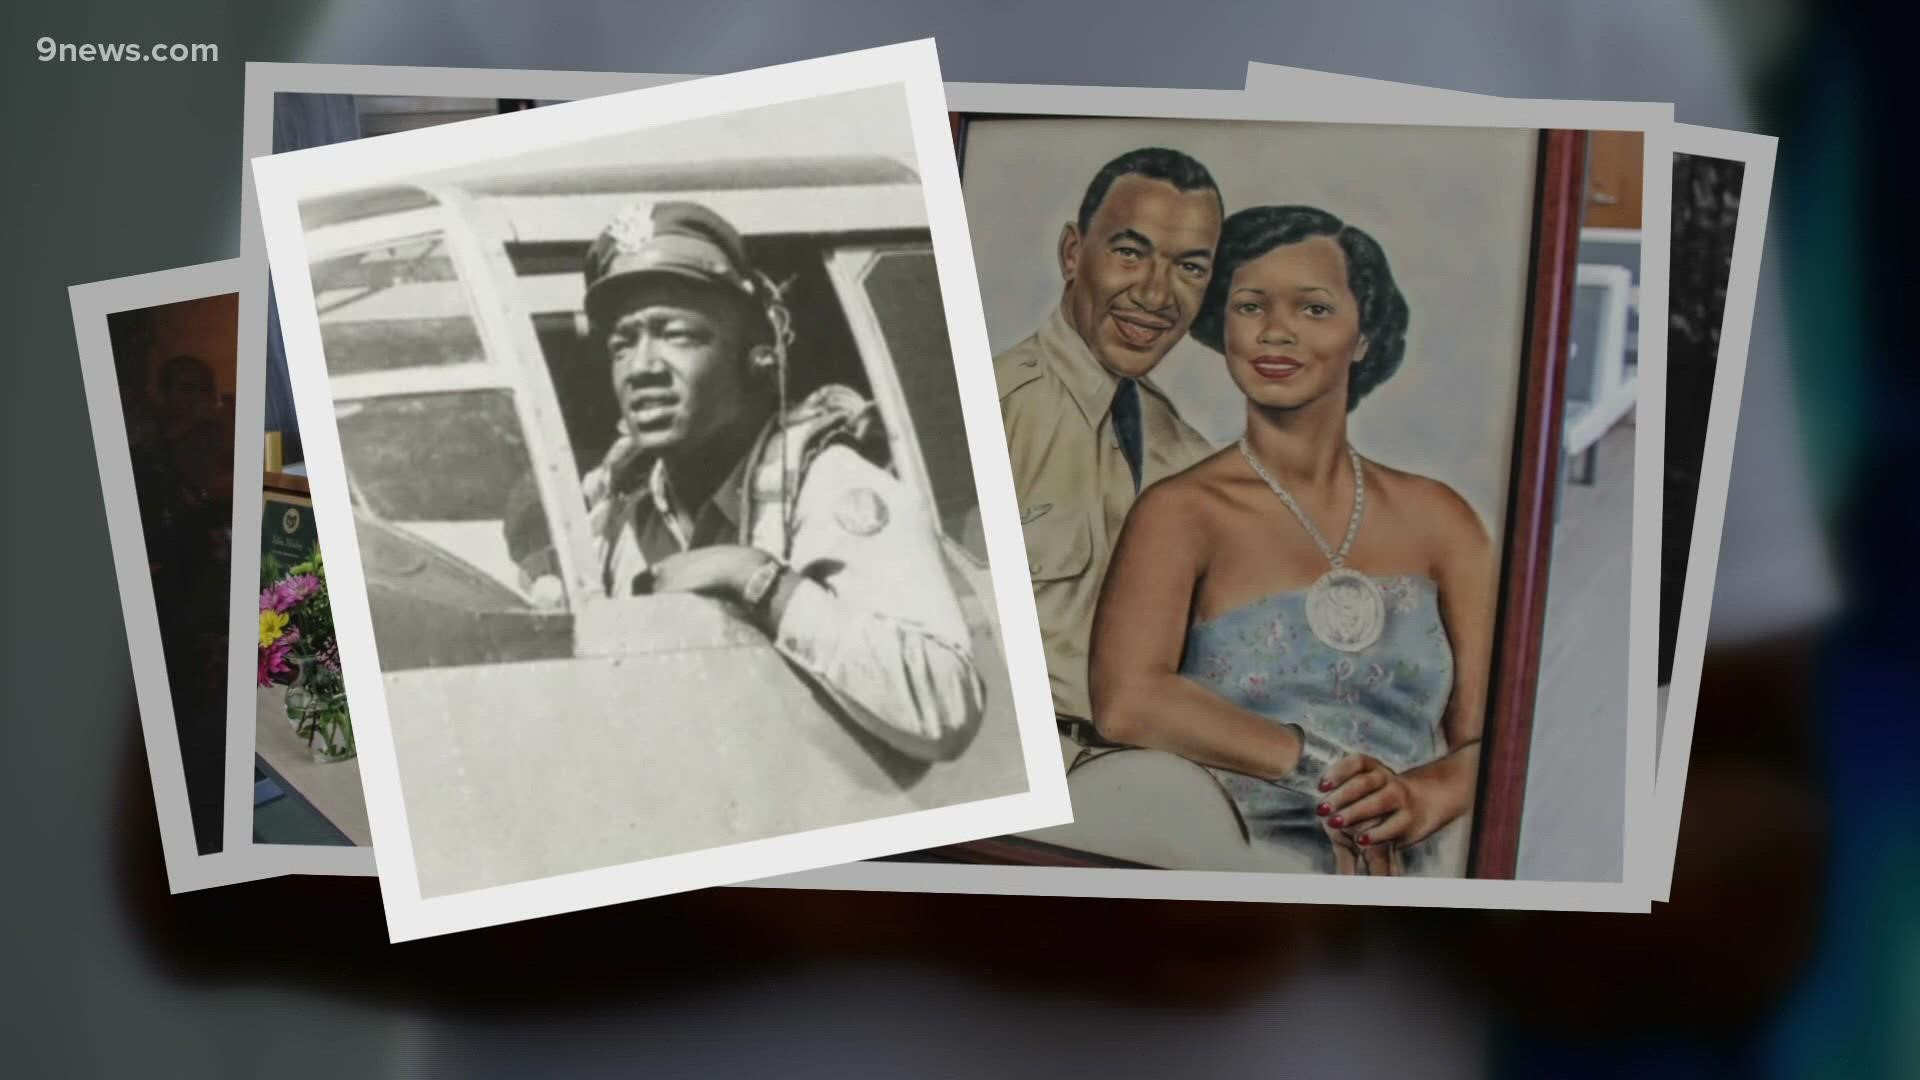 Lawmakers in Washington passed a bill today to name the VA's new outpatient clinic after Tuskegee airman John Mosley.